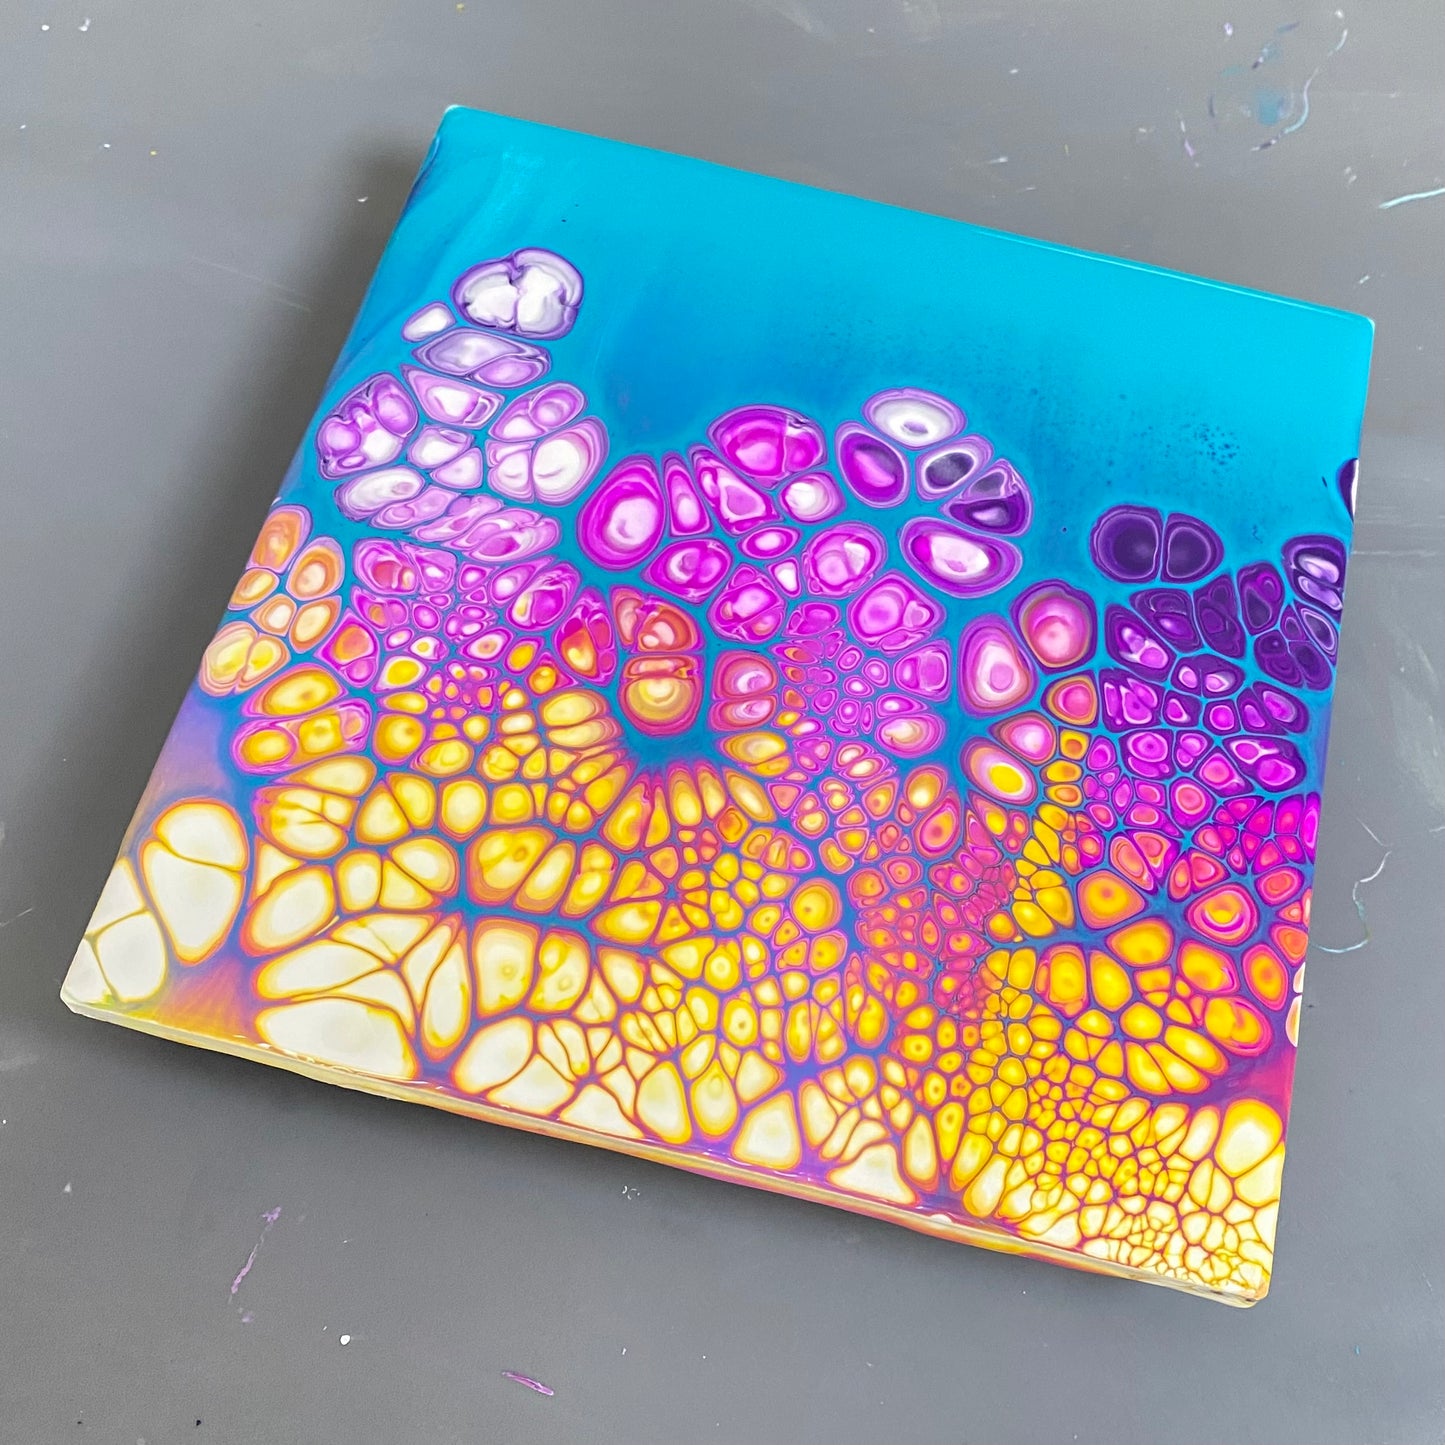 Gee Pours Beginner Acrylic Pour Kit and Class